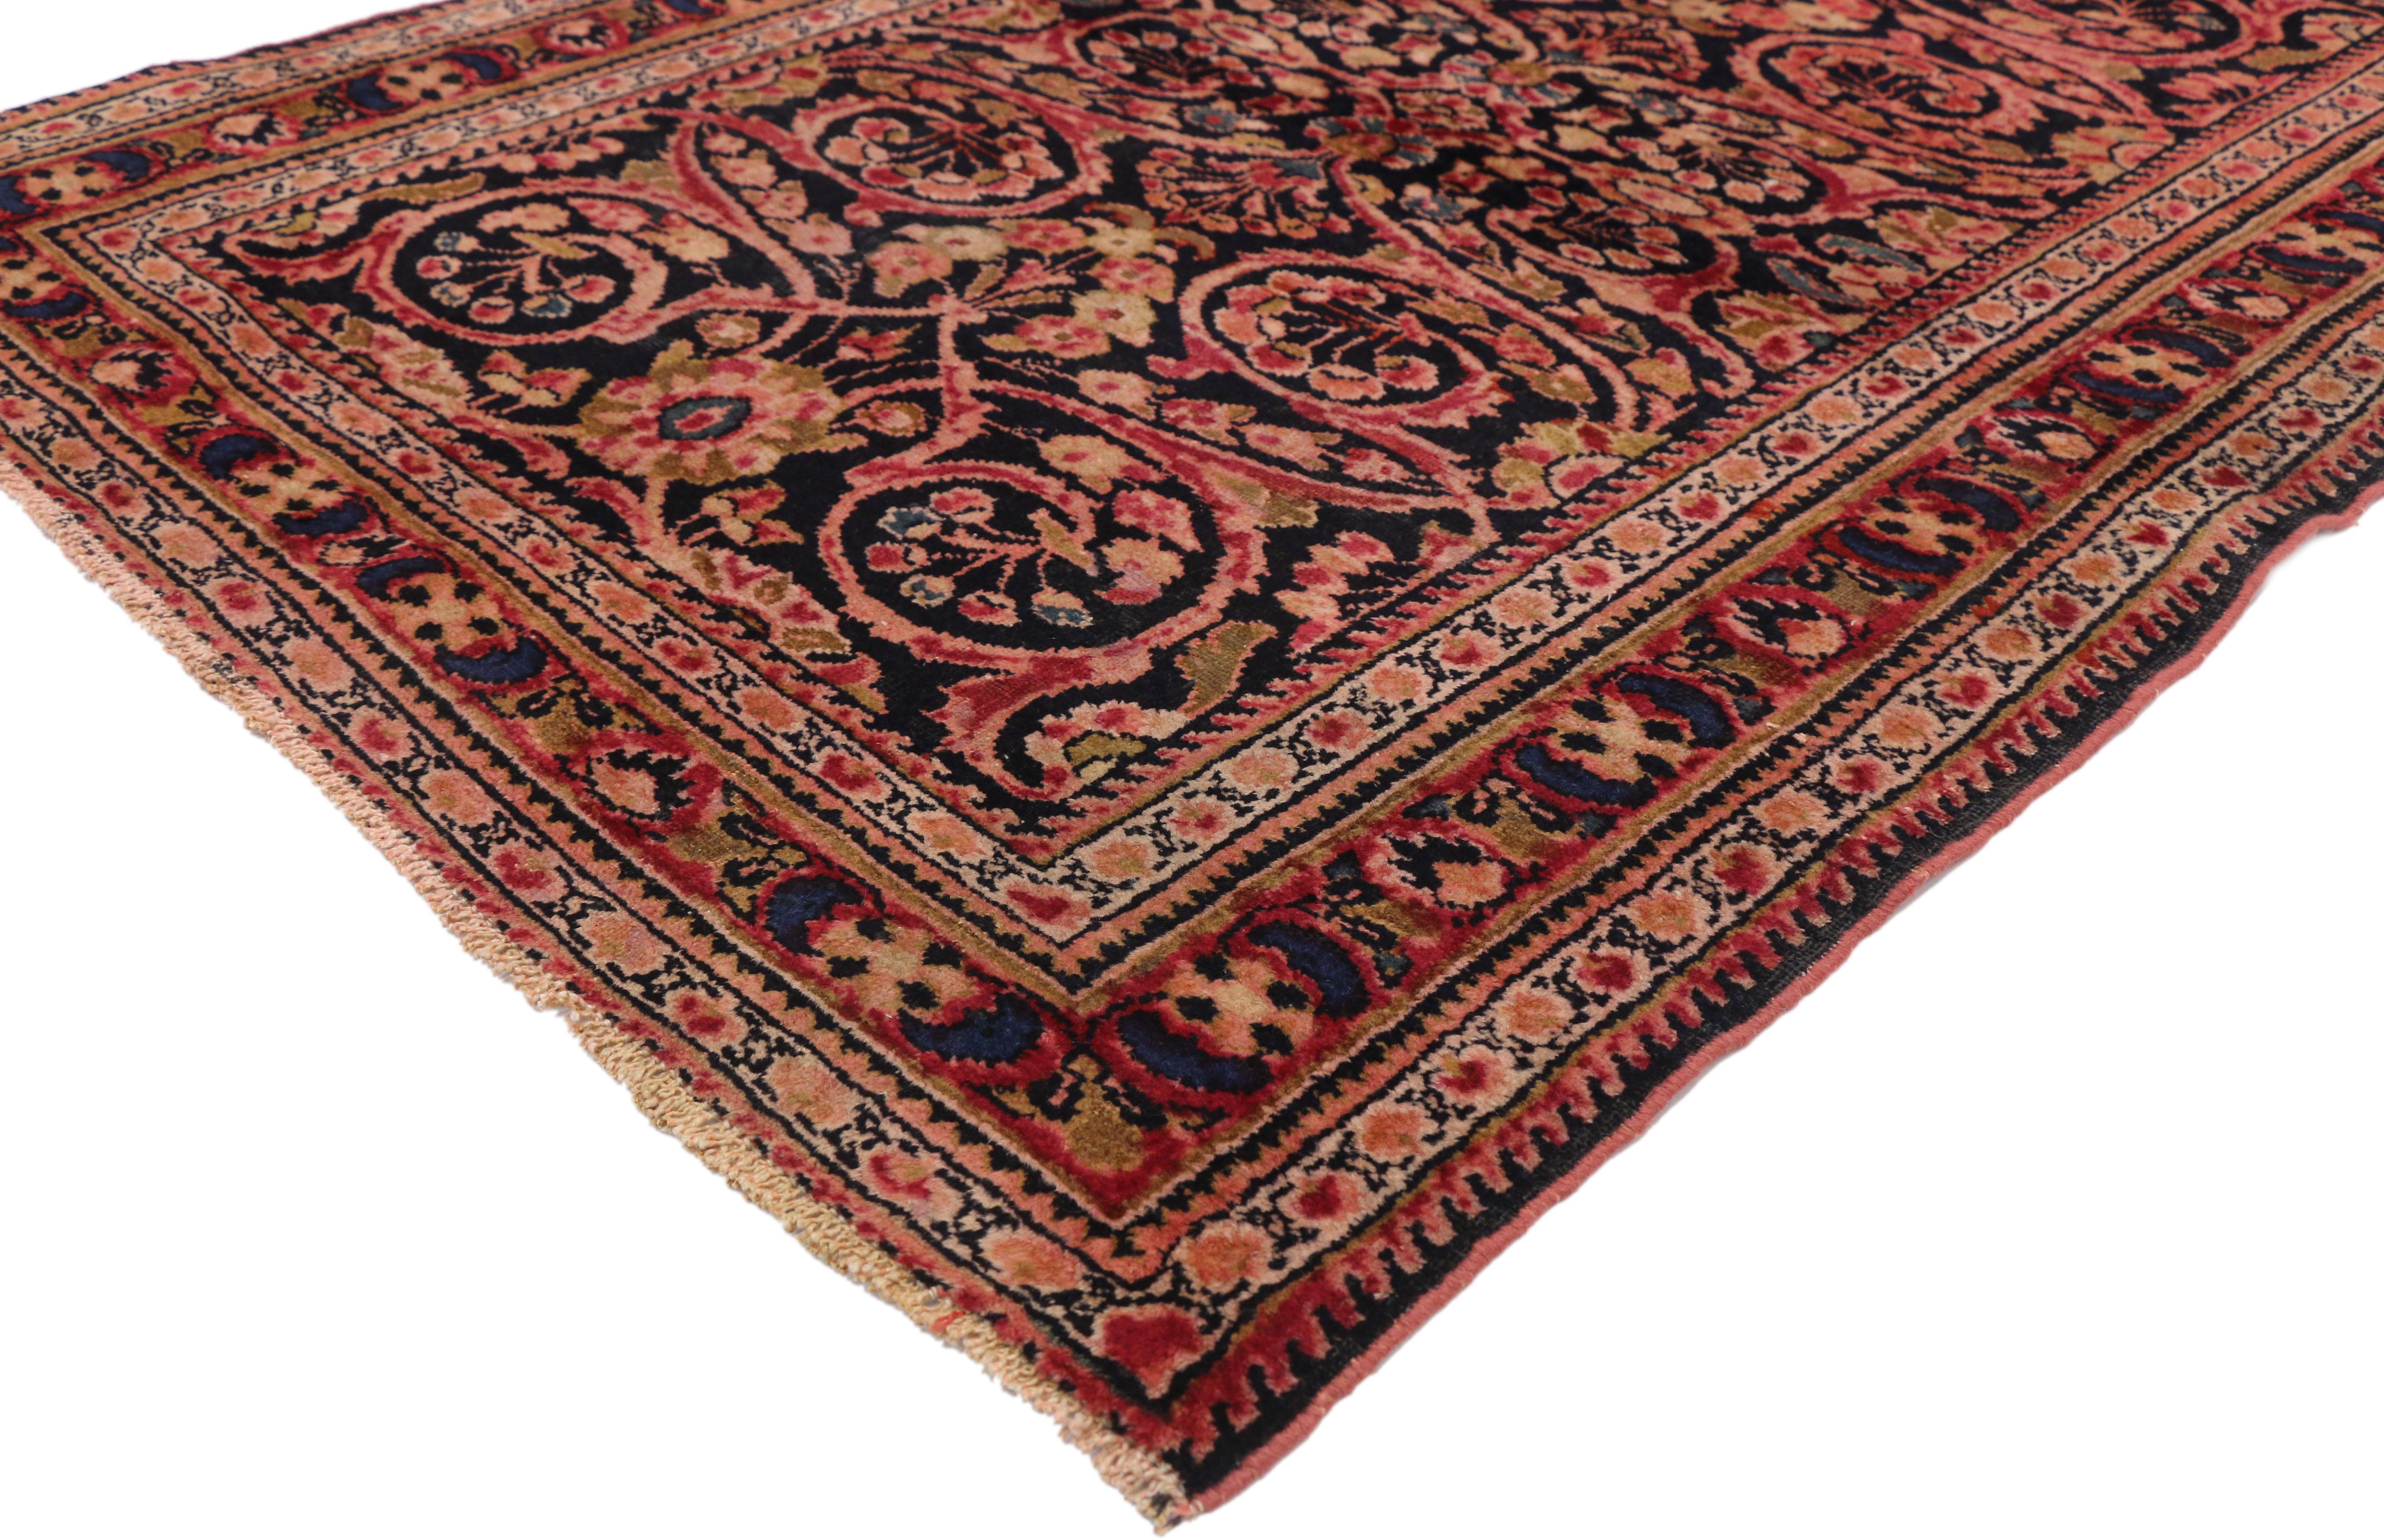 72381 antique Persian Lilihan rug with Baroque Renaissance style. This hand knotted wool antique Persian Lilihan rug features a graceful arabesque vine pattern dotted with flowers in red, pink, coral, salmon and azure on a field of navy blue. The